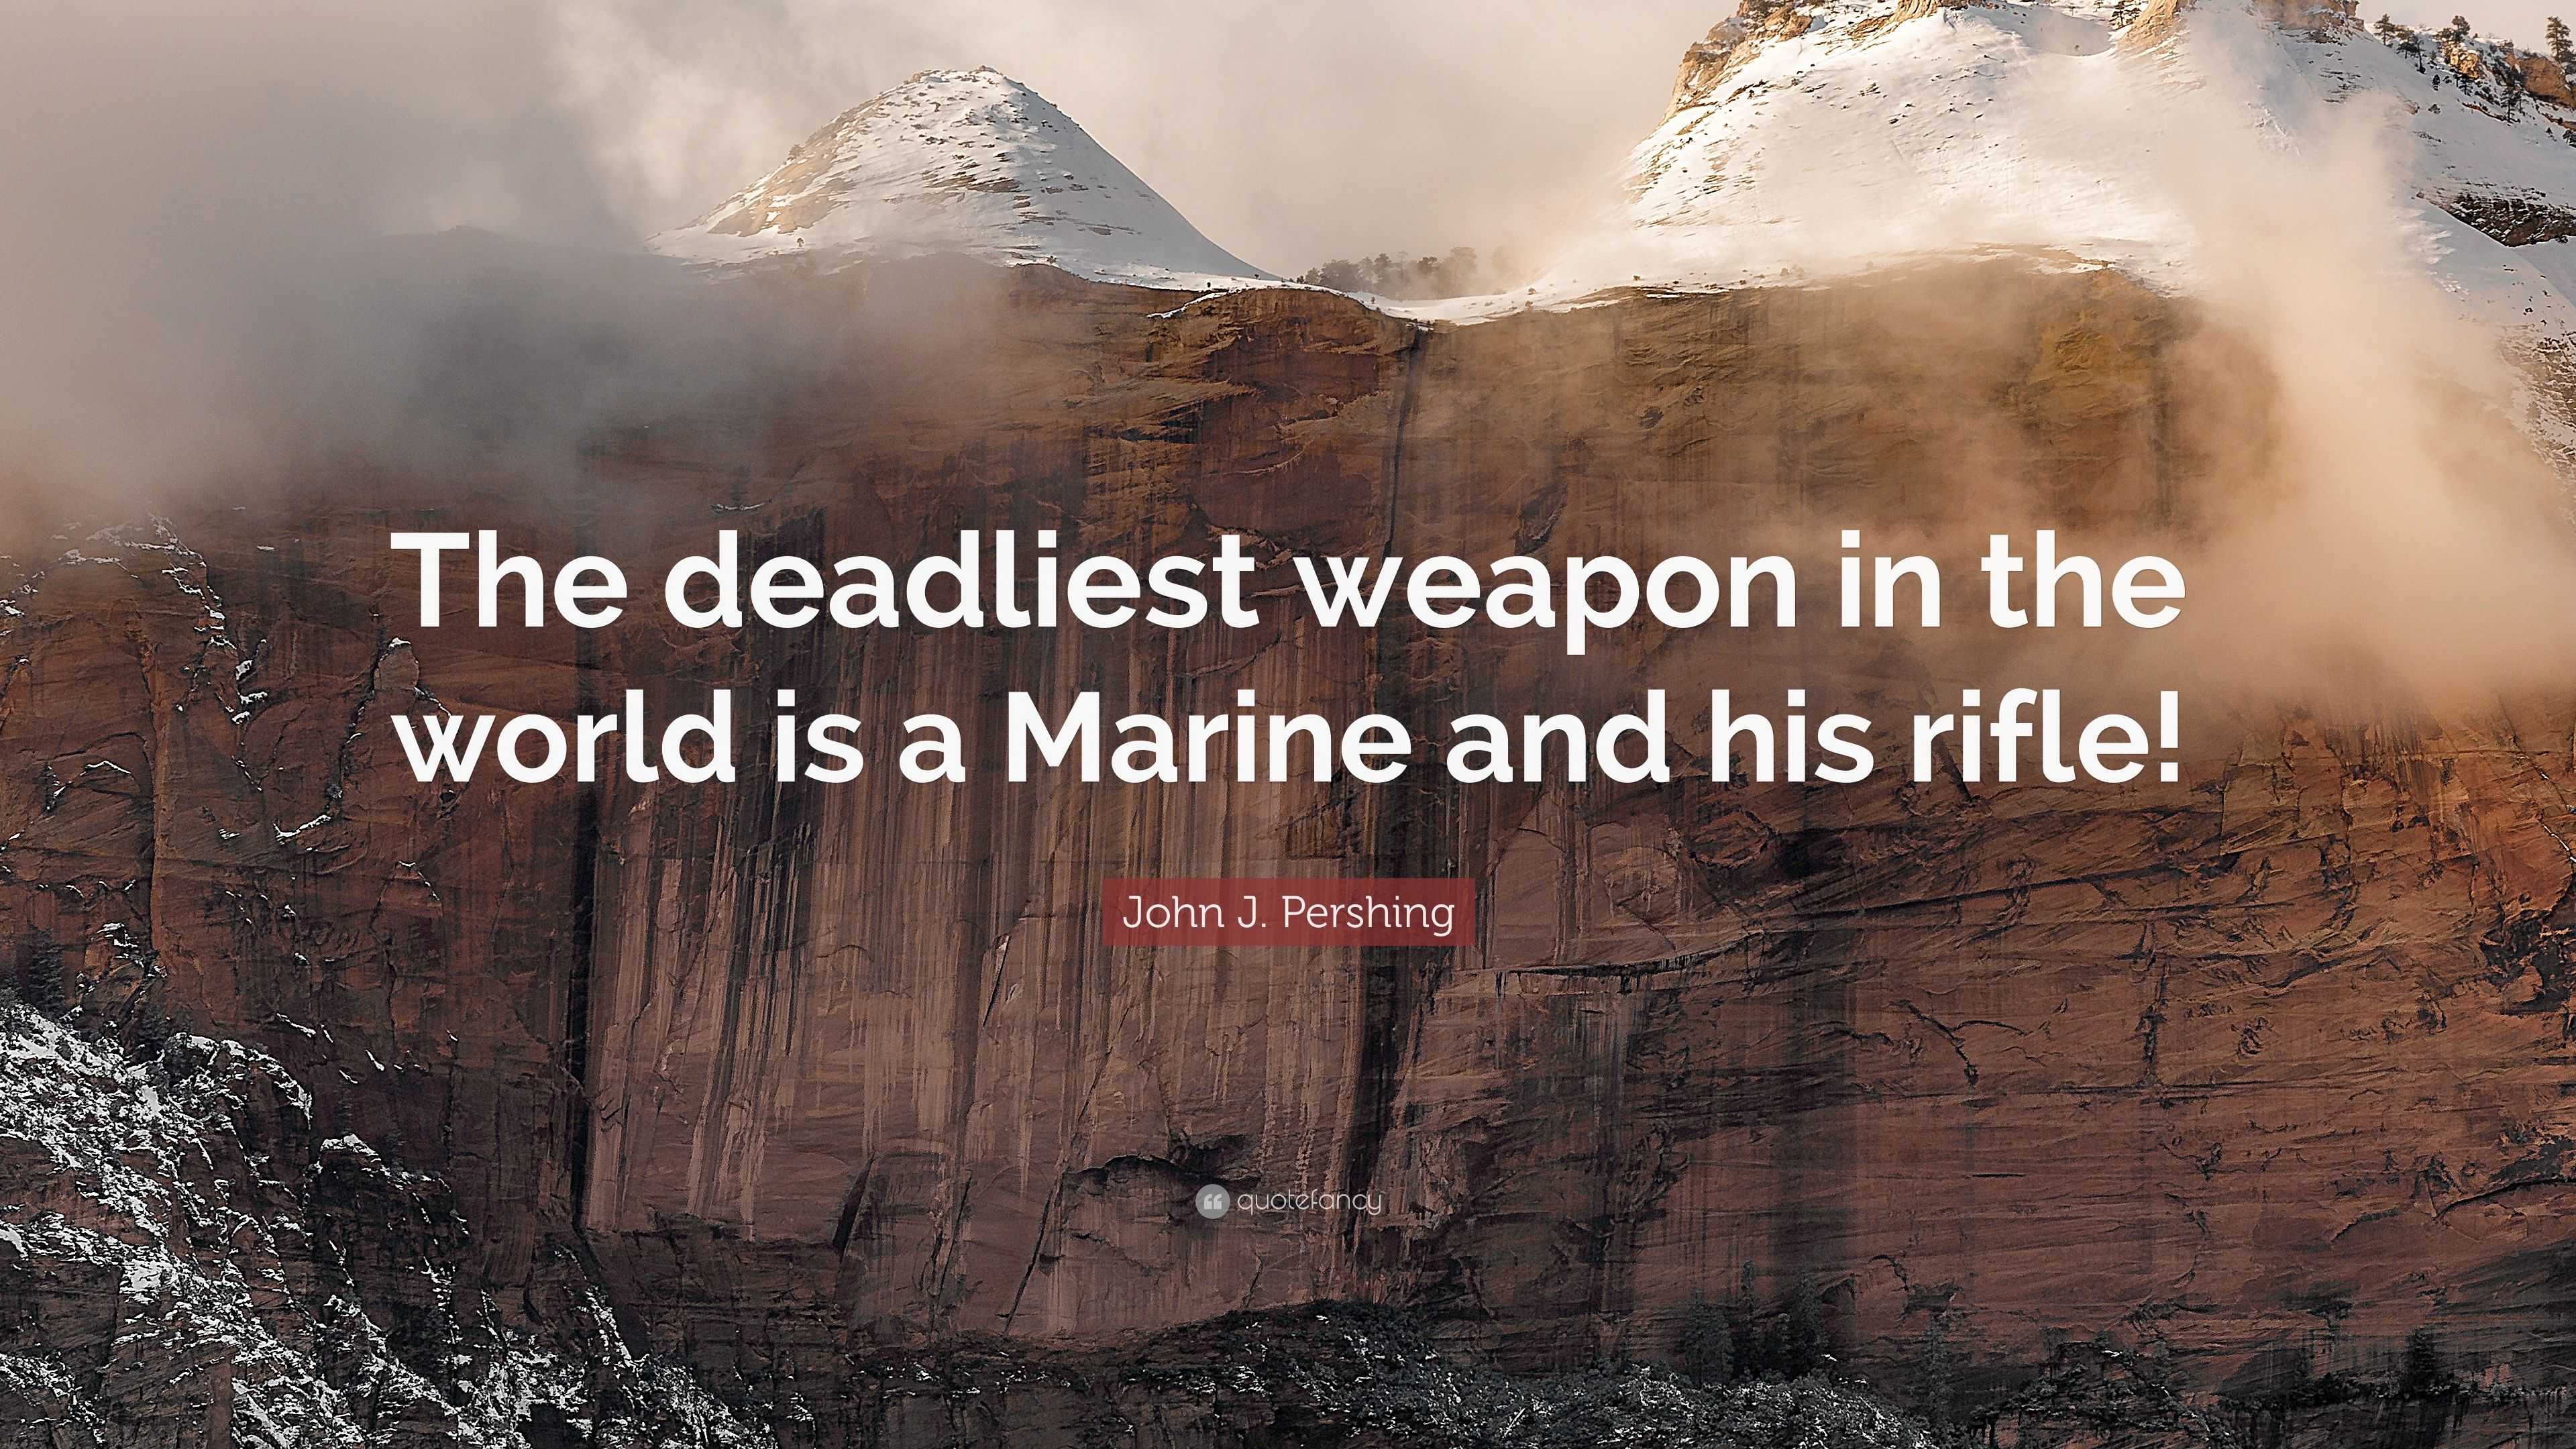 companies of heroes m226 pershing quote